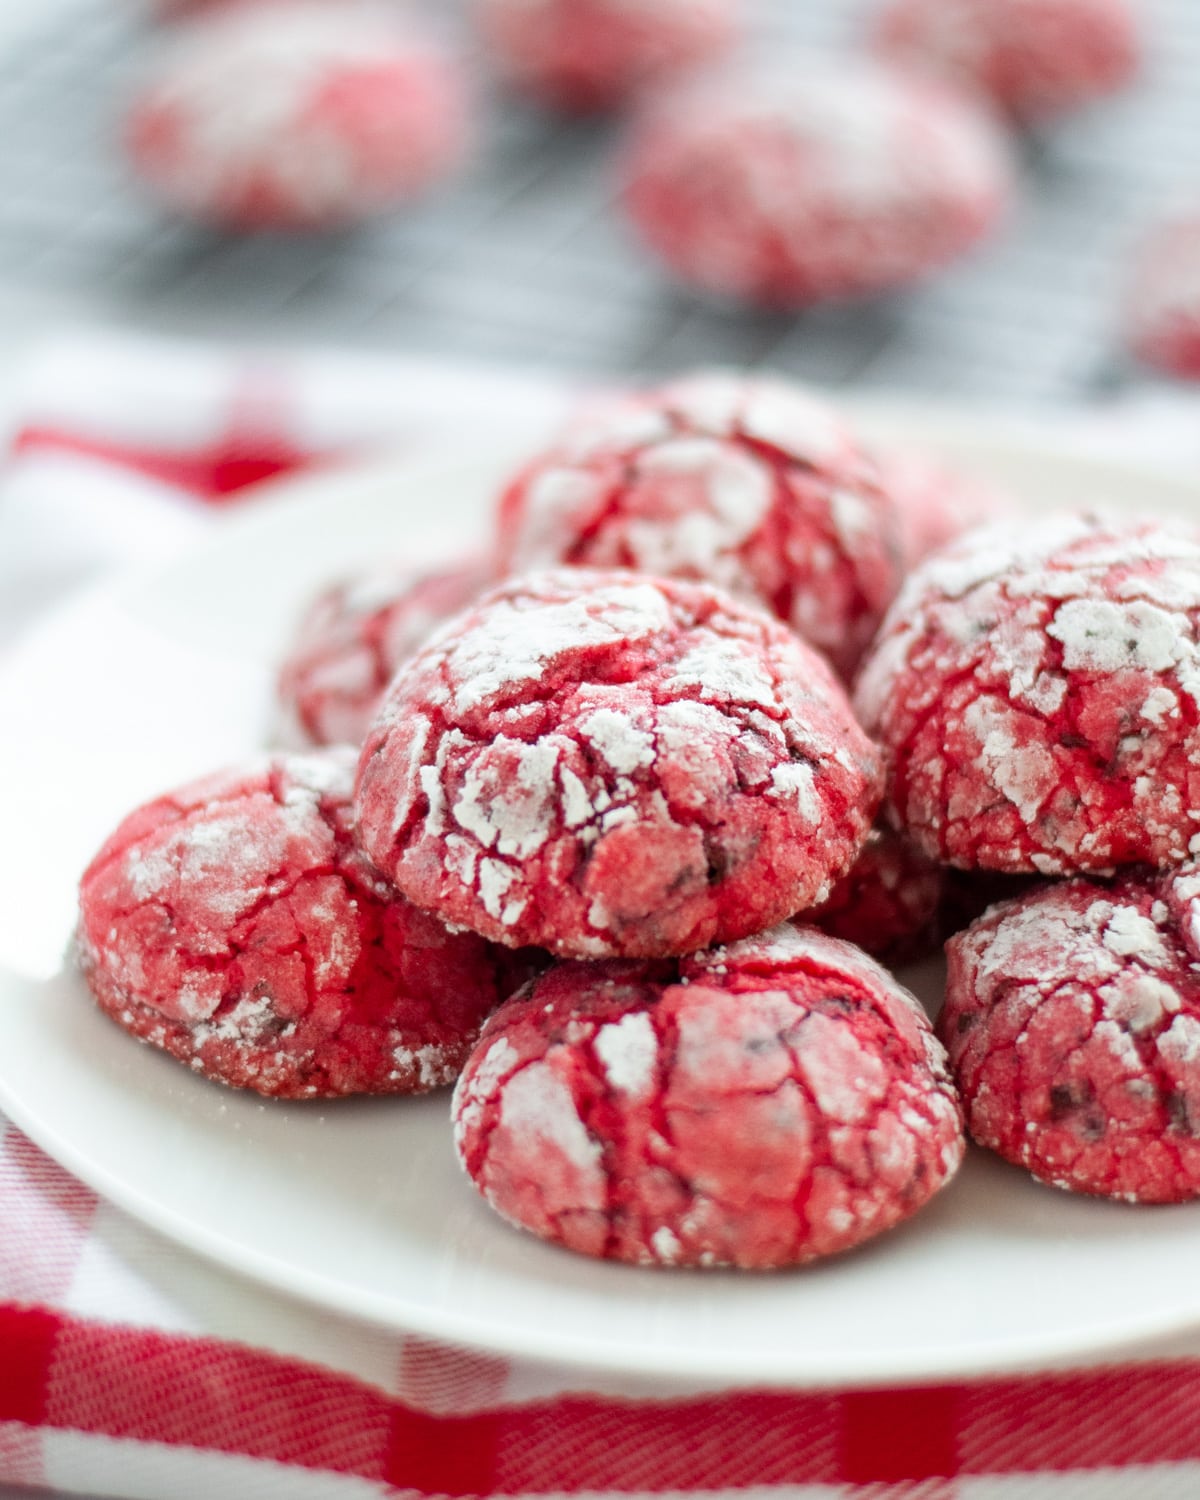 white plate full of red and white chocolate cherry crinkle cookies set on a red and white checkered linen. Blurred in the background you can see a wire cooling rack with additional cookies.